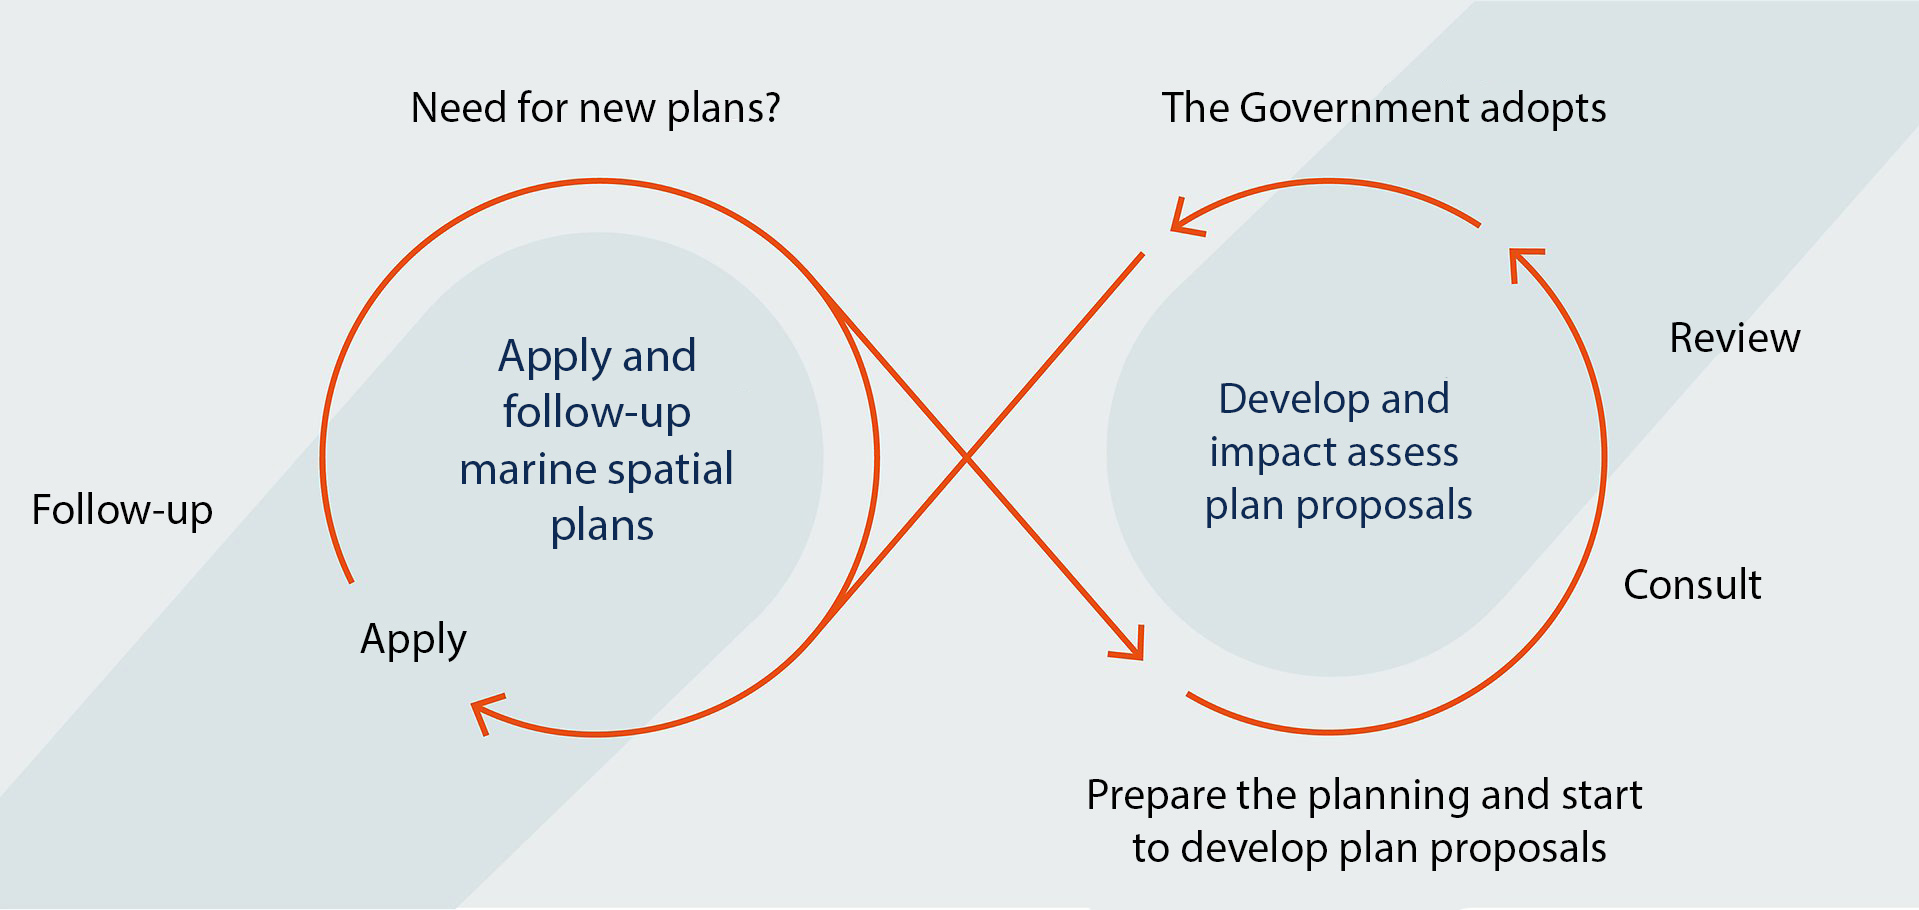 Figure illustrates the cyclical process of marine spatial planning, which begins with the development of a plan proposal that is consulted and reviewed. The Government adopts the plans, which then are applied. Then they are followed up and the need for new plans is examined, if necessary new plan proposals are drawn up and the process starts again.